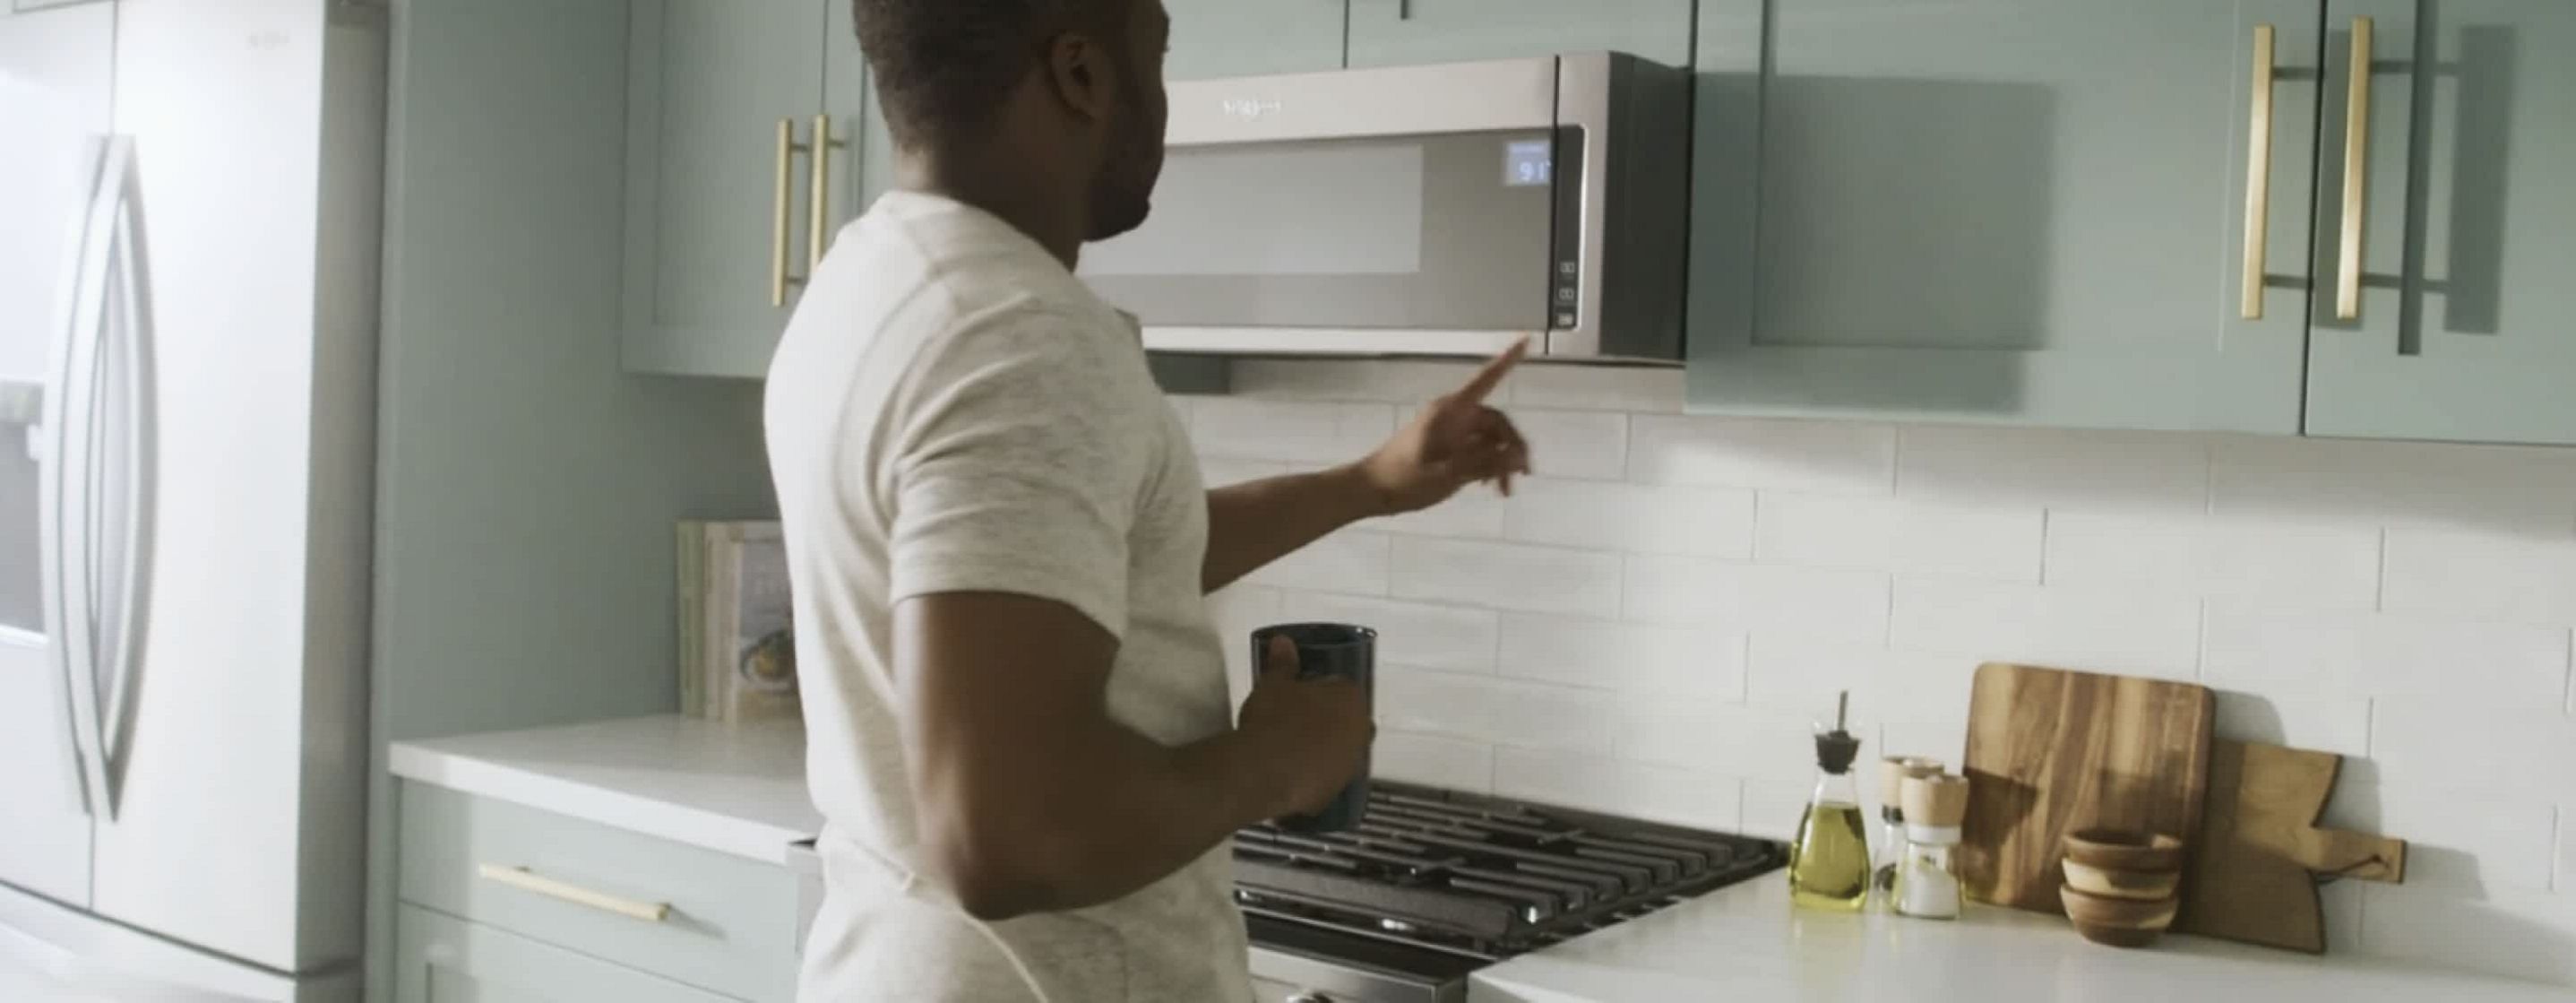 A man sets the time on his microwave